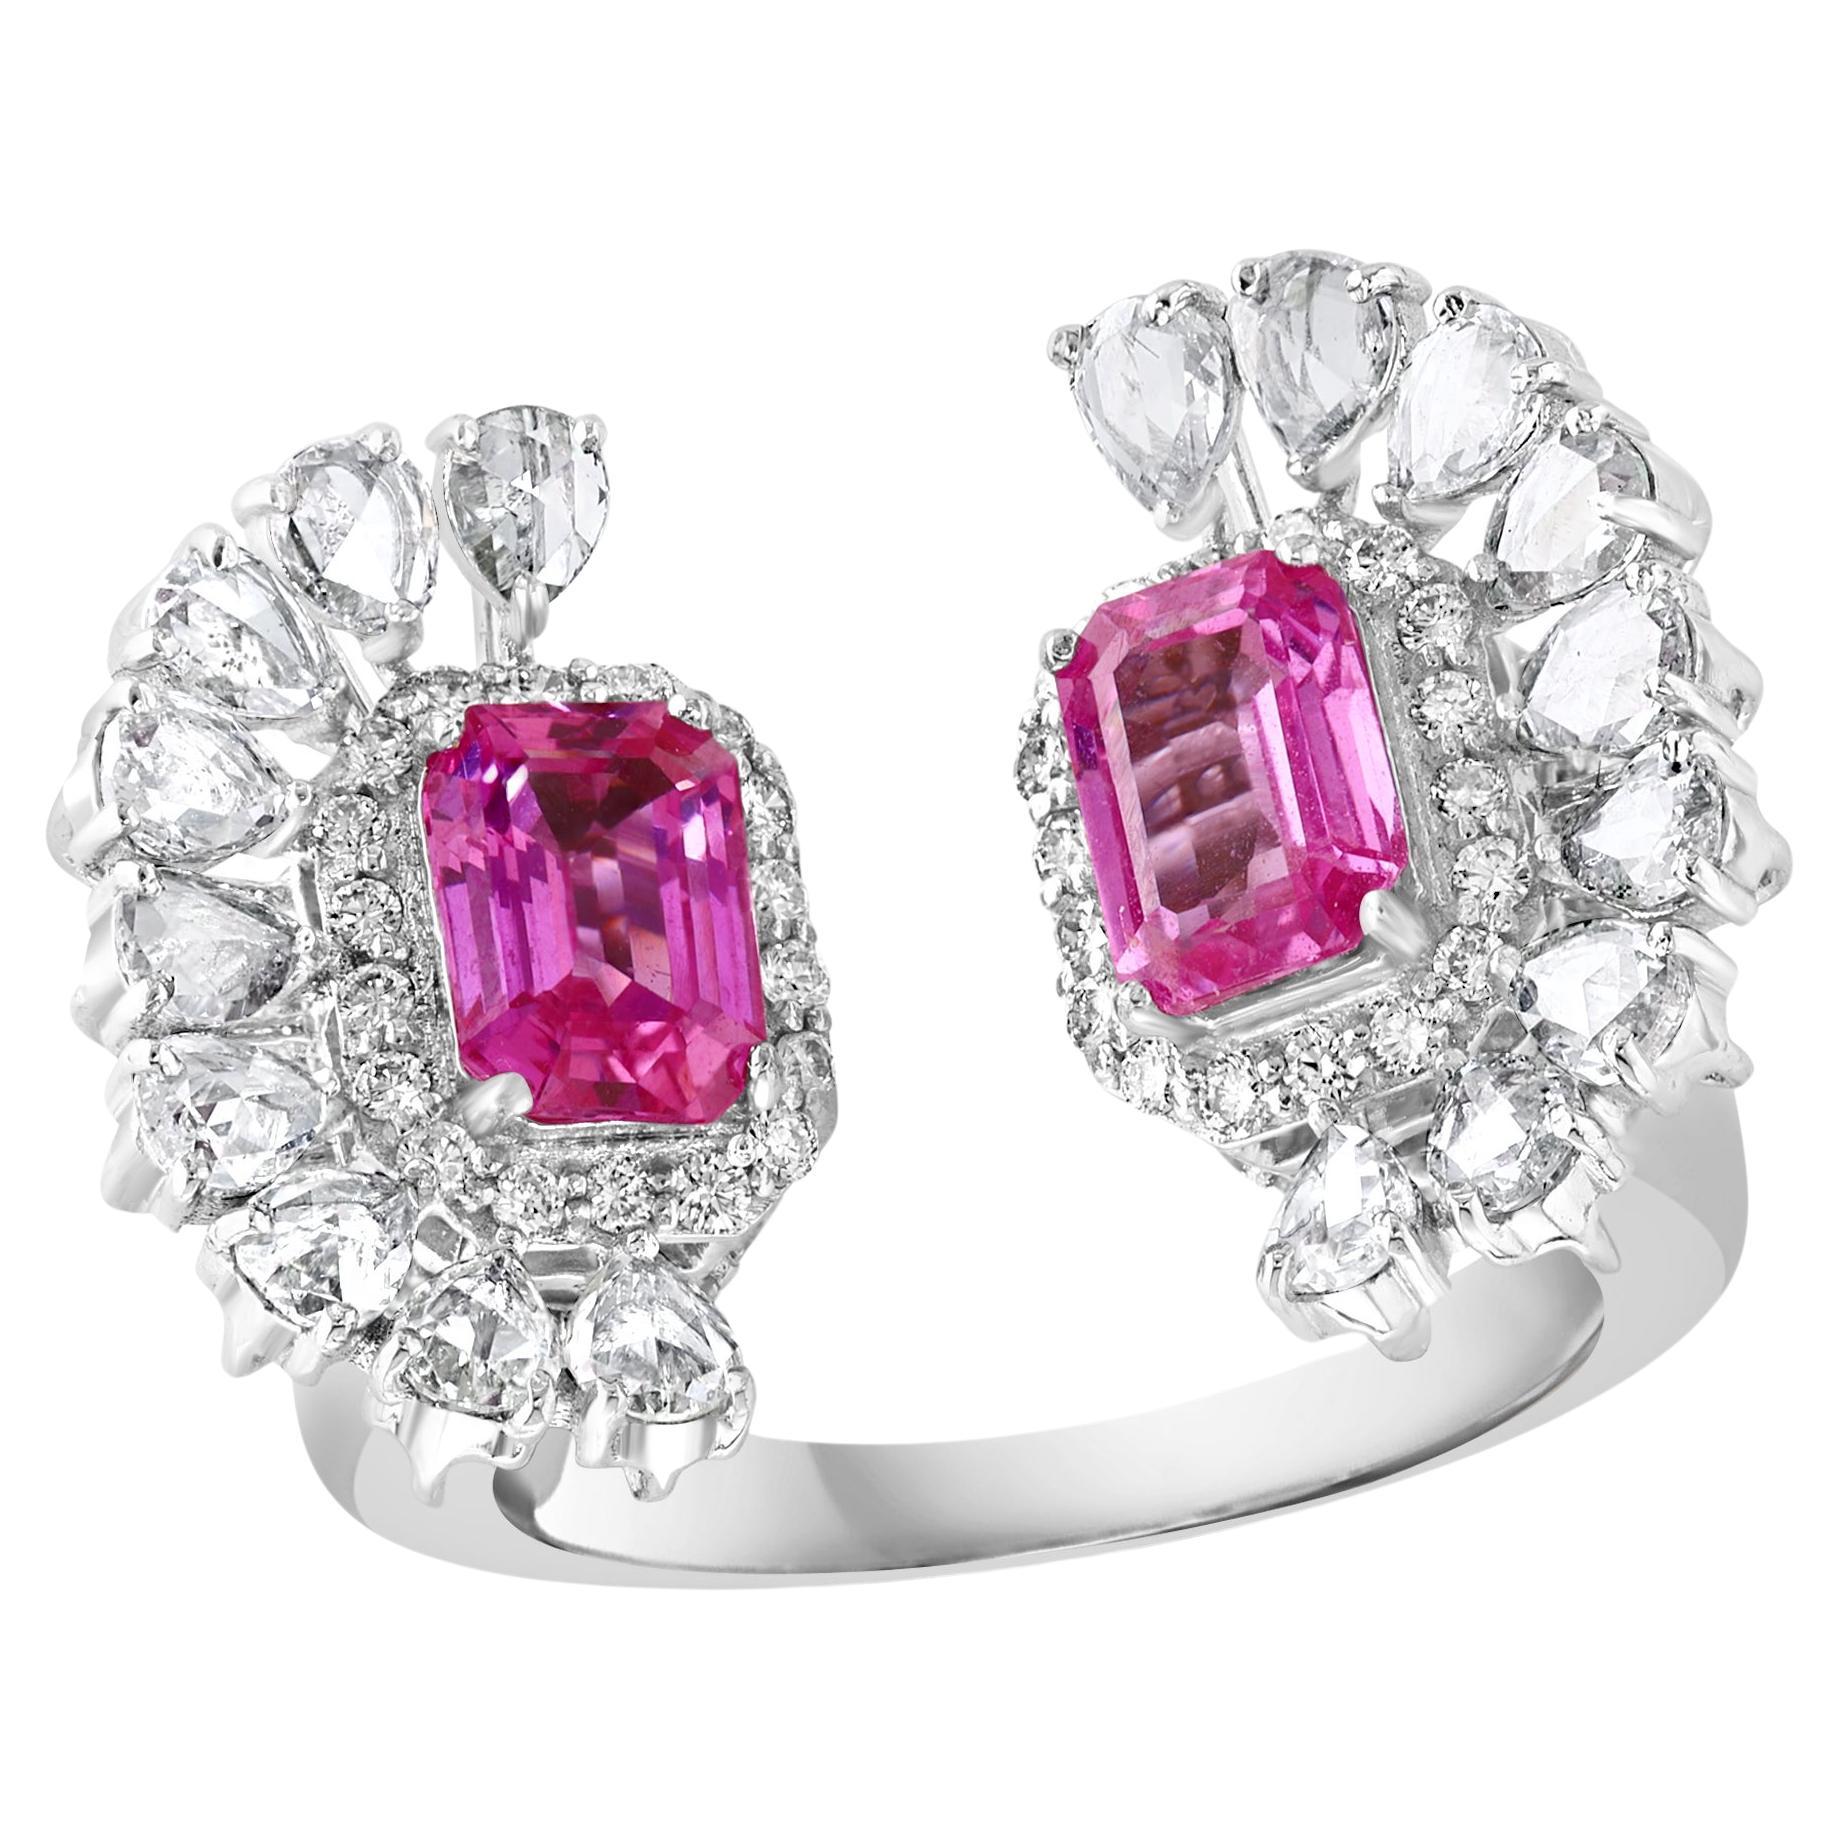 2.5 Ct Pink Emerald Cut Pink  Sapphire & 2.8 Ct Diamond 18 Kt White Gold Ring S6